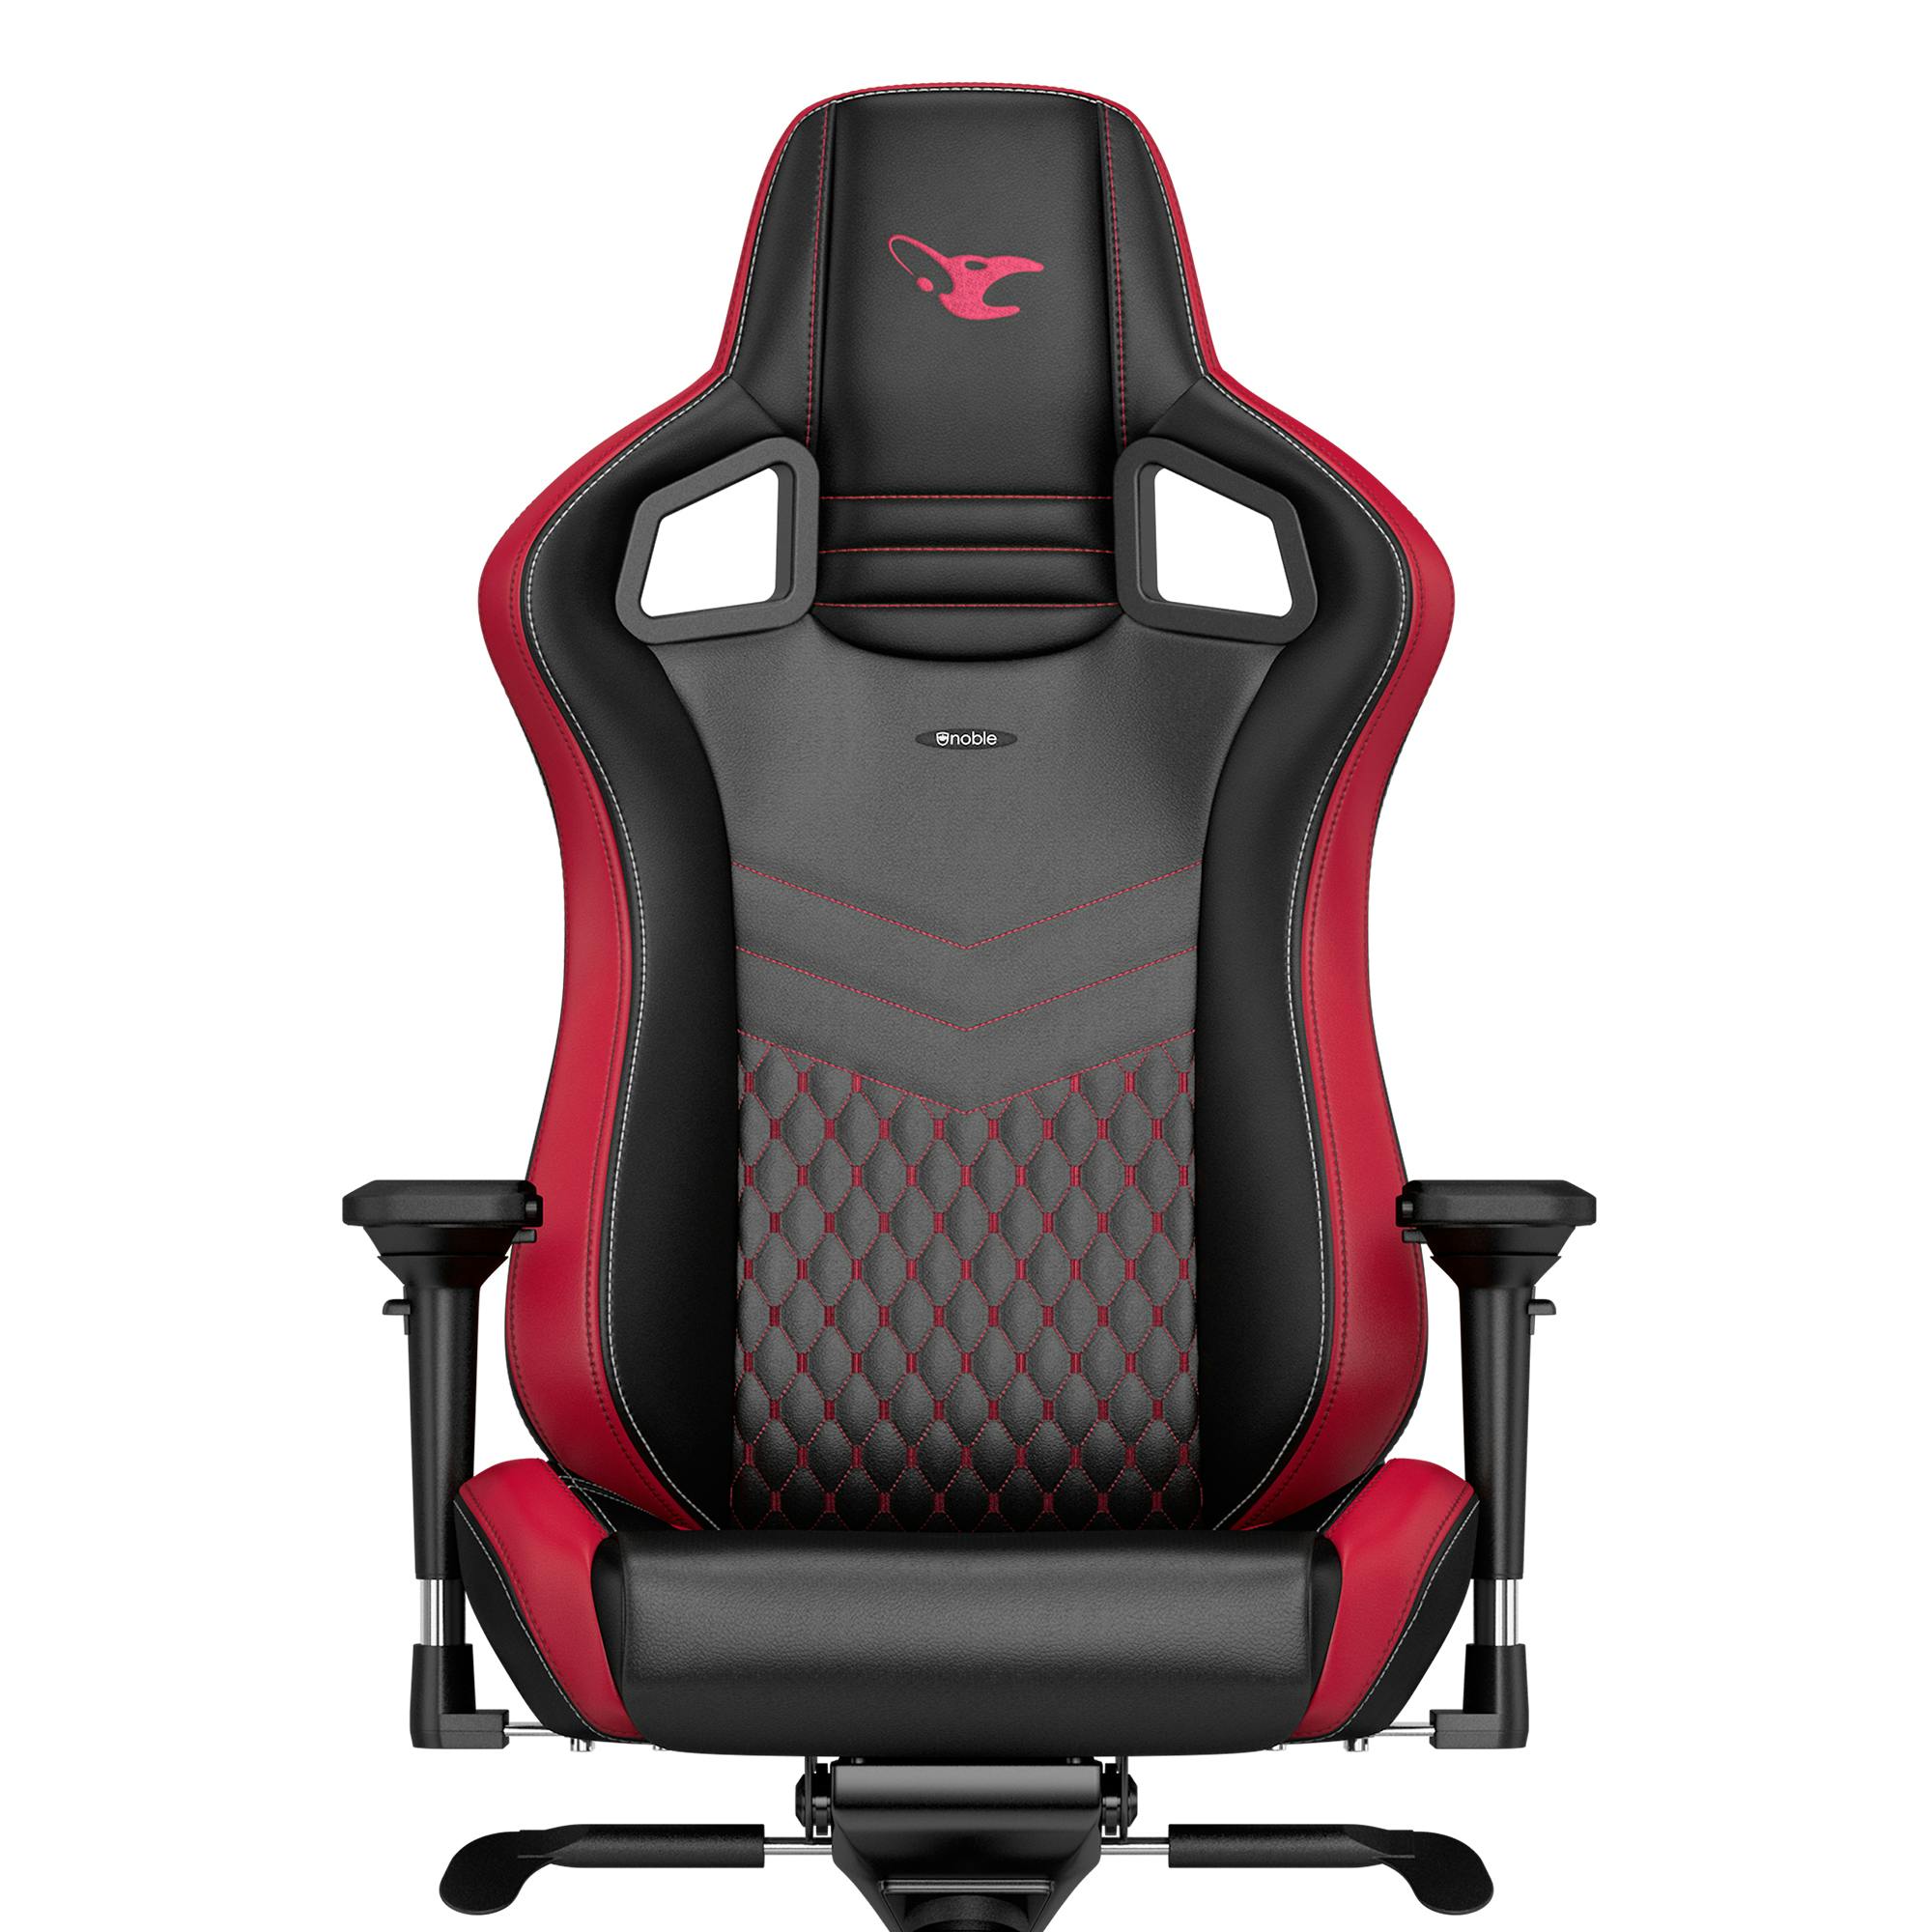 noblechairs - EPIC mousesports Editie